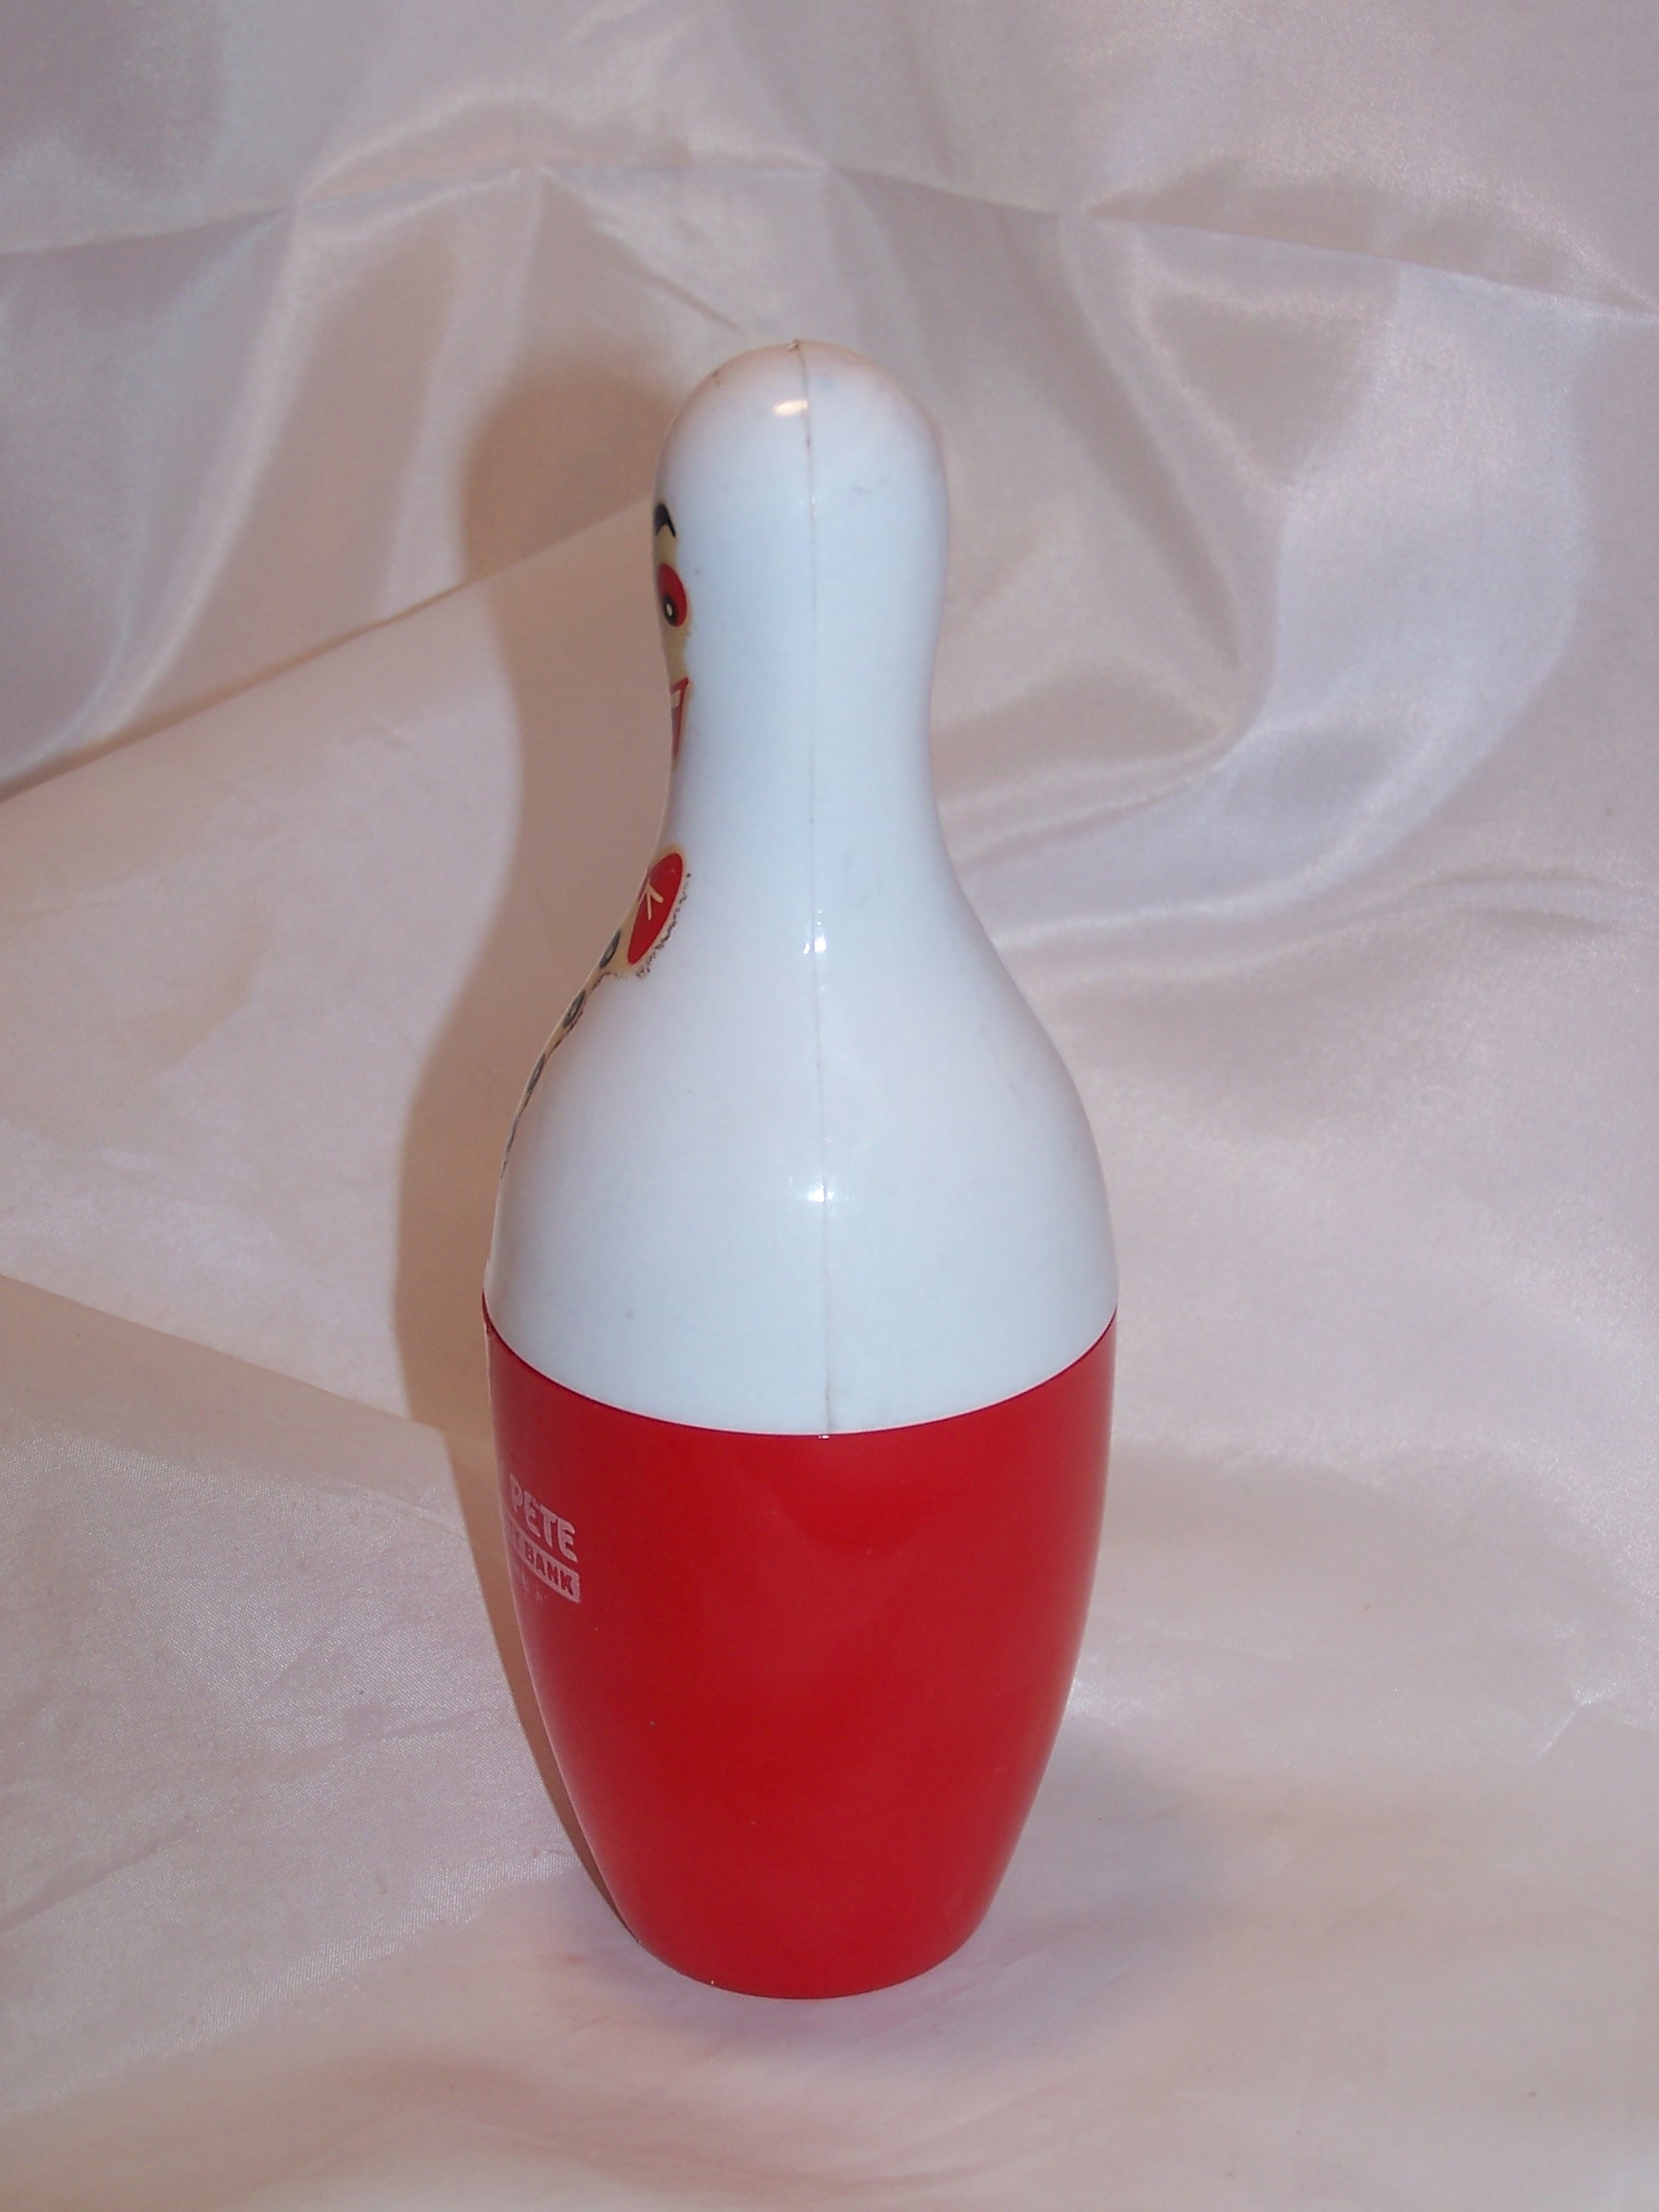 Image 1 of Bowling Pin Money Pete Bank, Red Eyes and Buttons, Spare Time